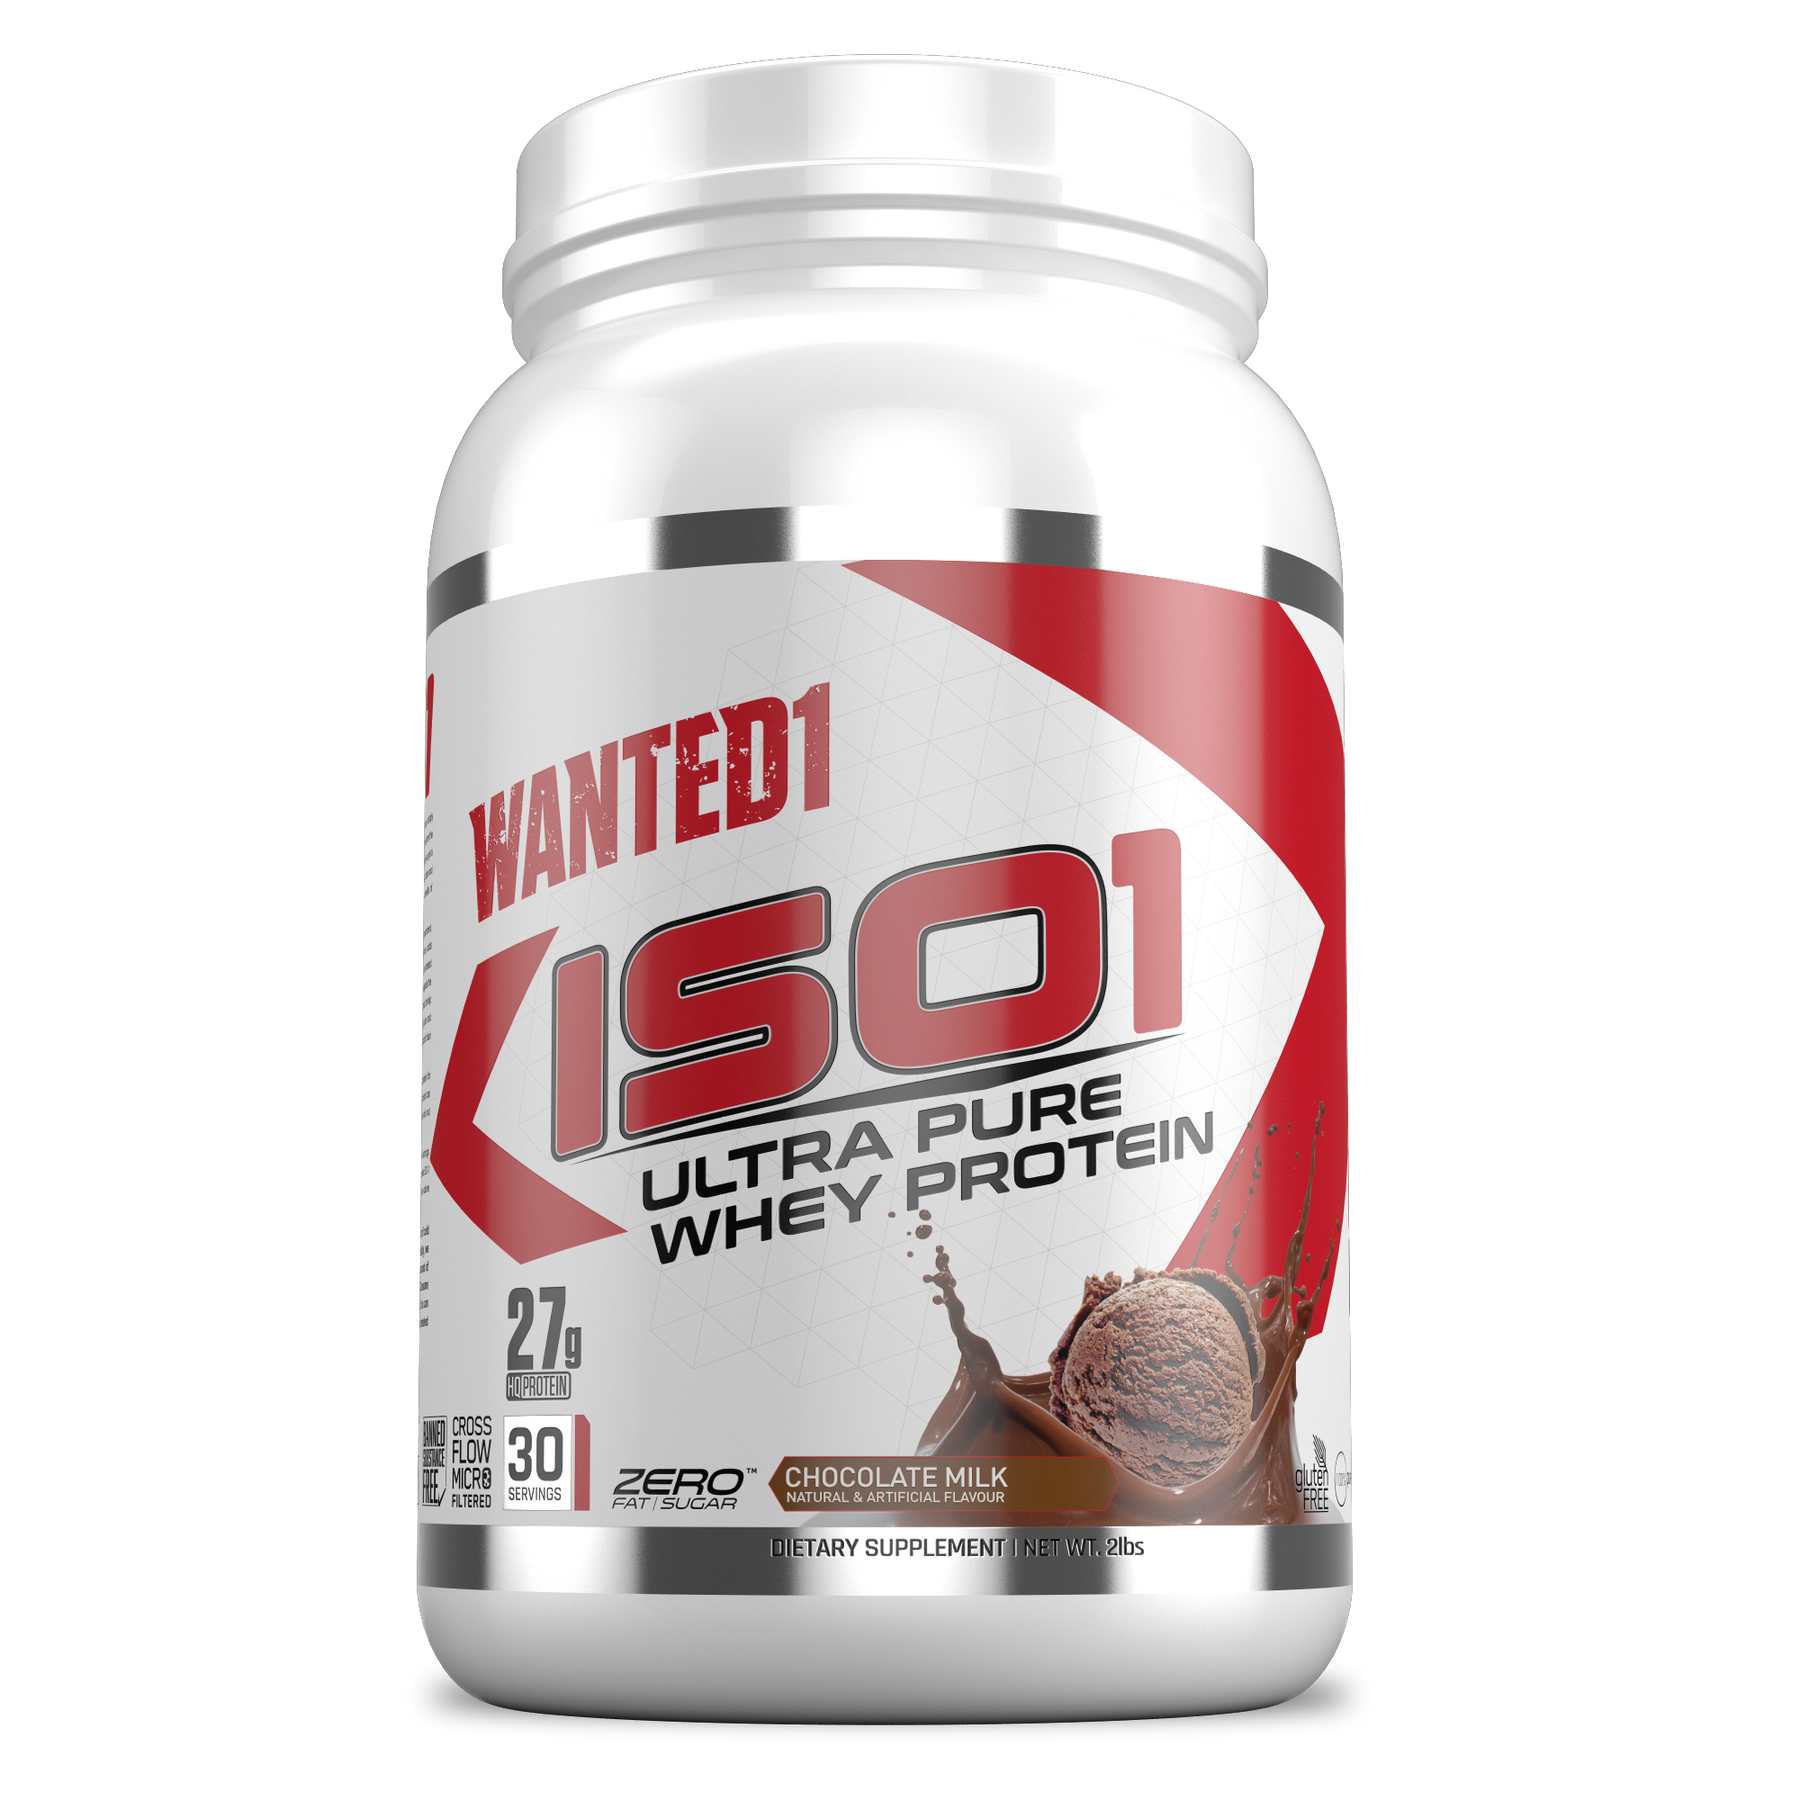 Wanted1 ISO1 - Ultra Pure Whey Isolate Protein - 2lbs